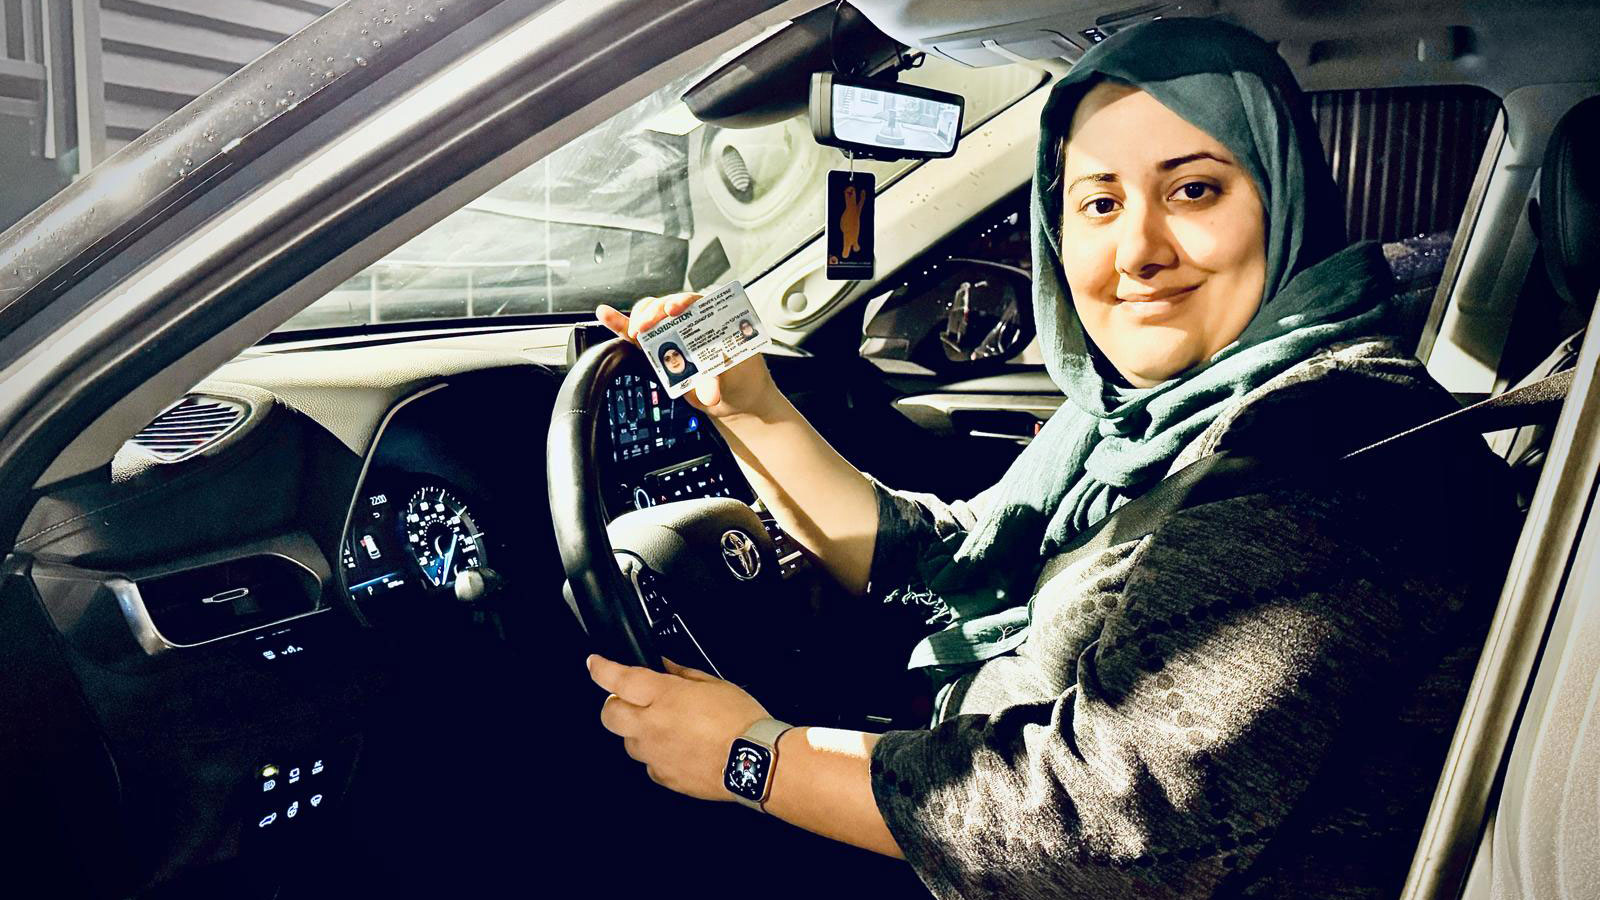 Woman wearing a hijab sitting in the driver's seat. She looks slightly over her shoulder smiling at the camera. She holds a driver's license in her hand.